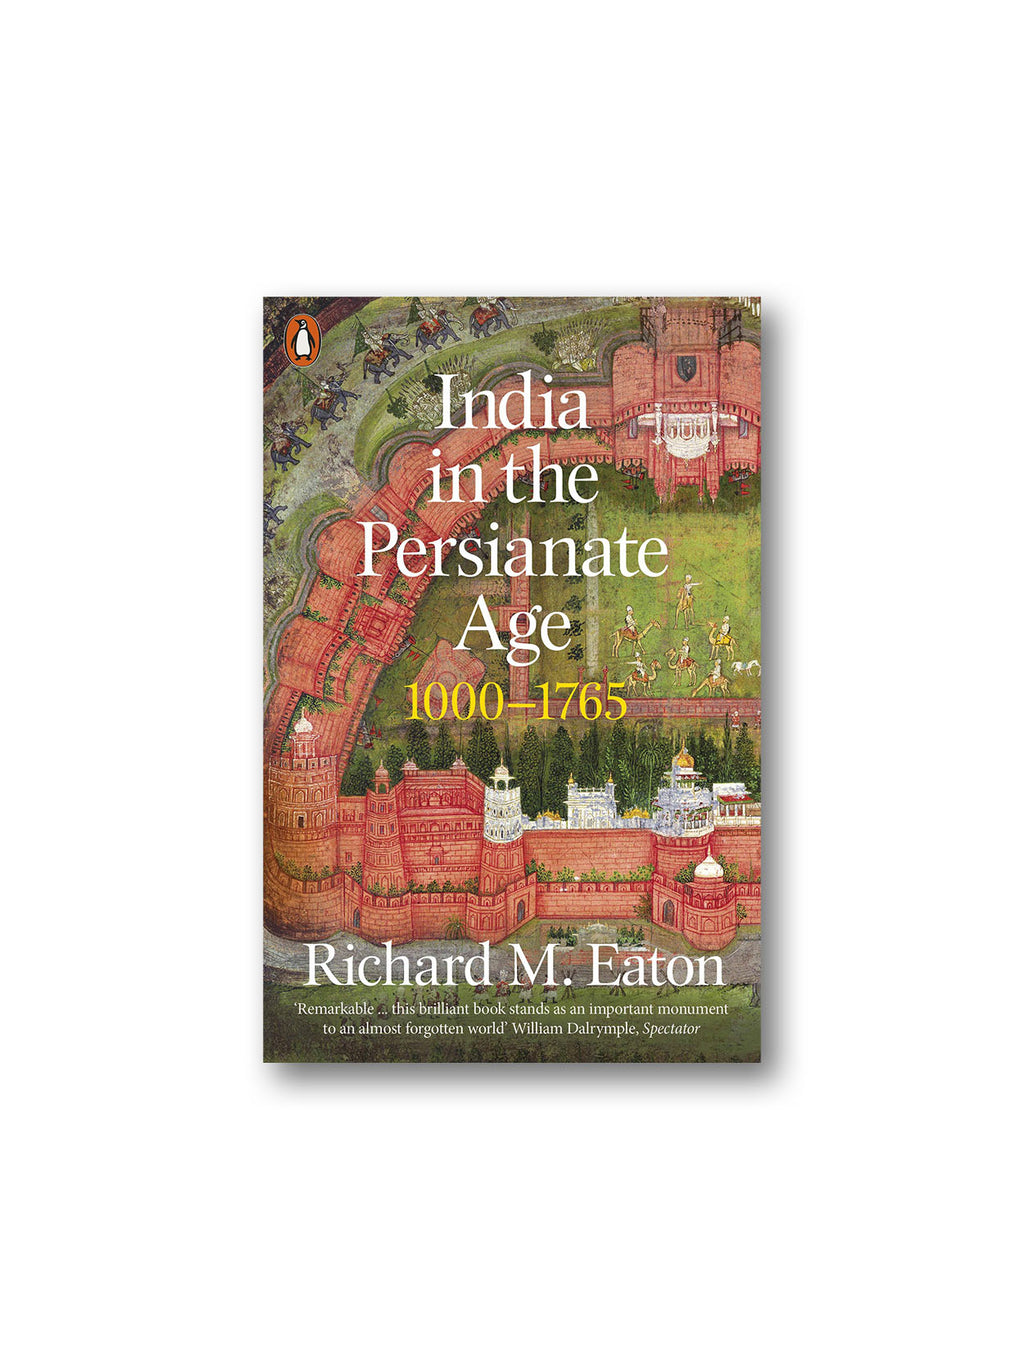 India in the Persianate Age : 1000-1765